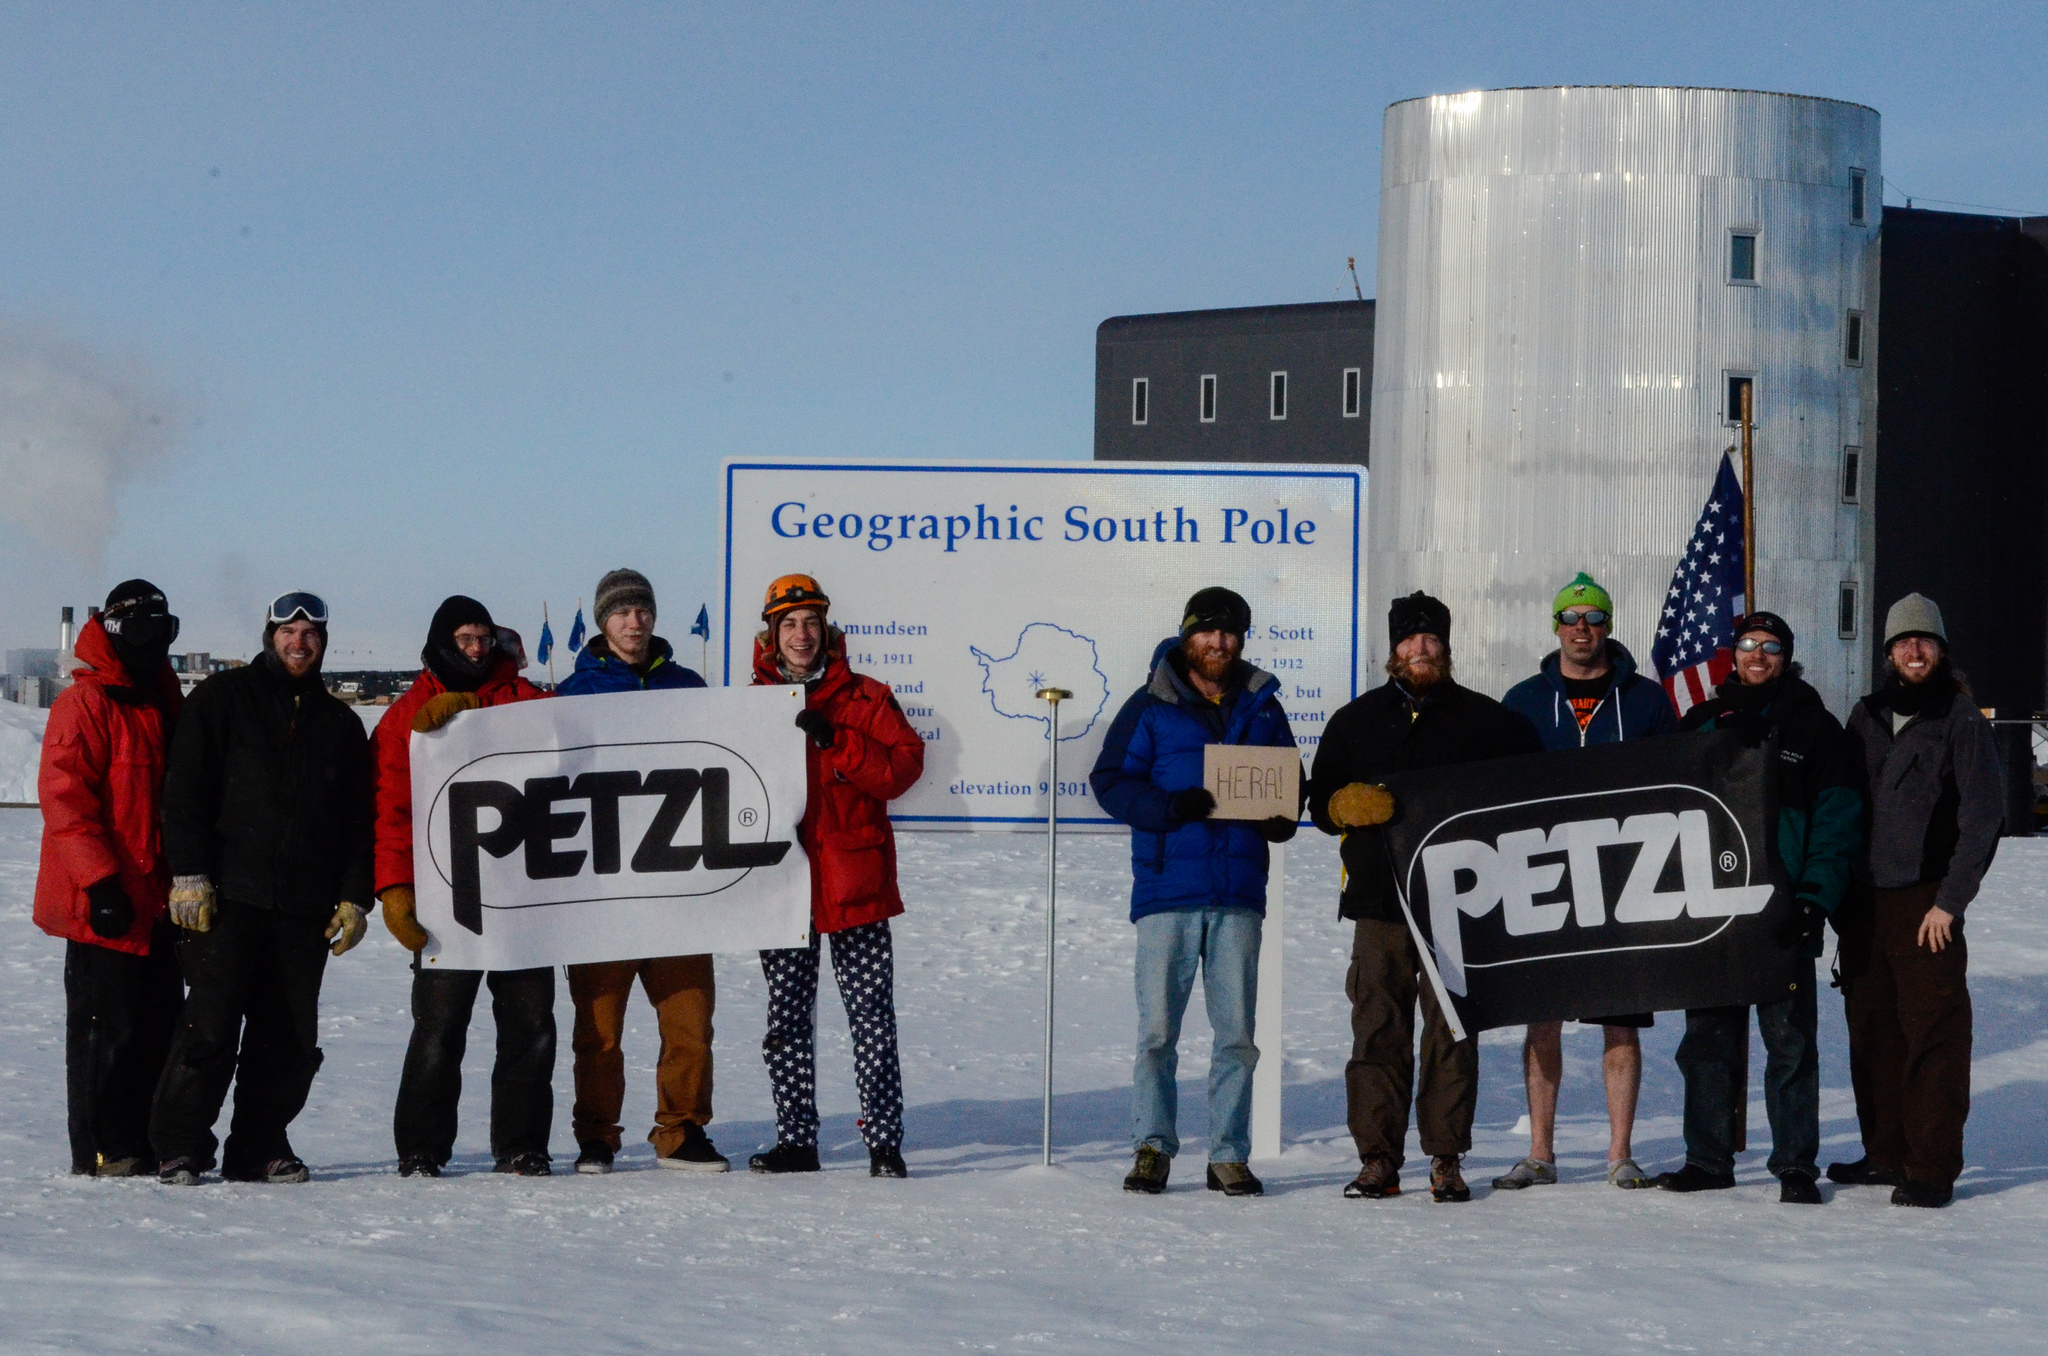 The South Pole Station Crew Loves Petzl!